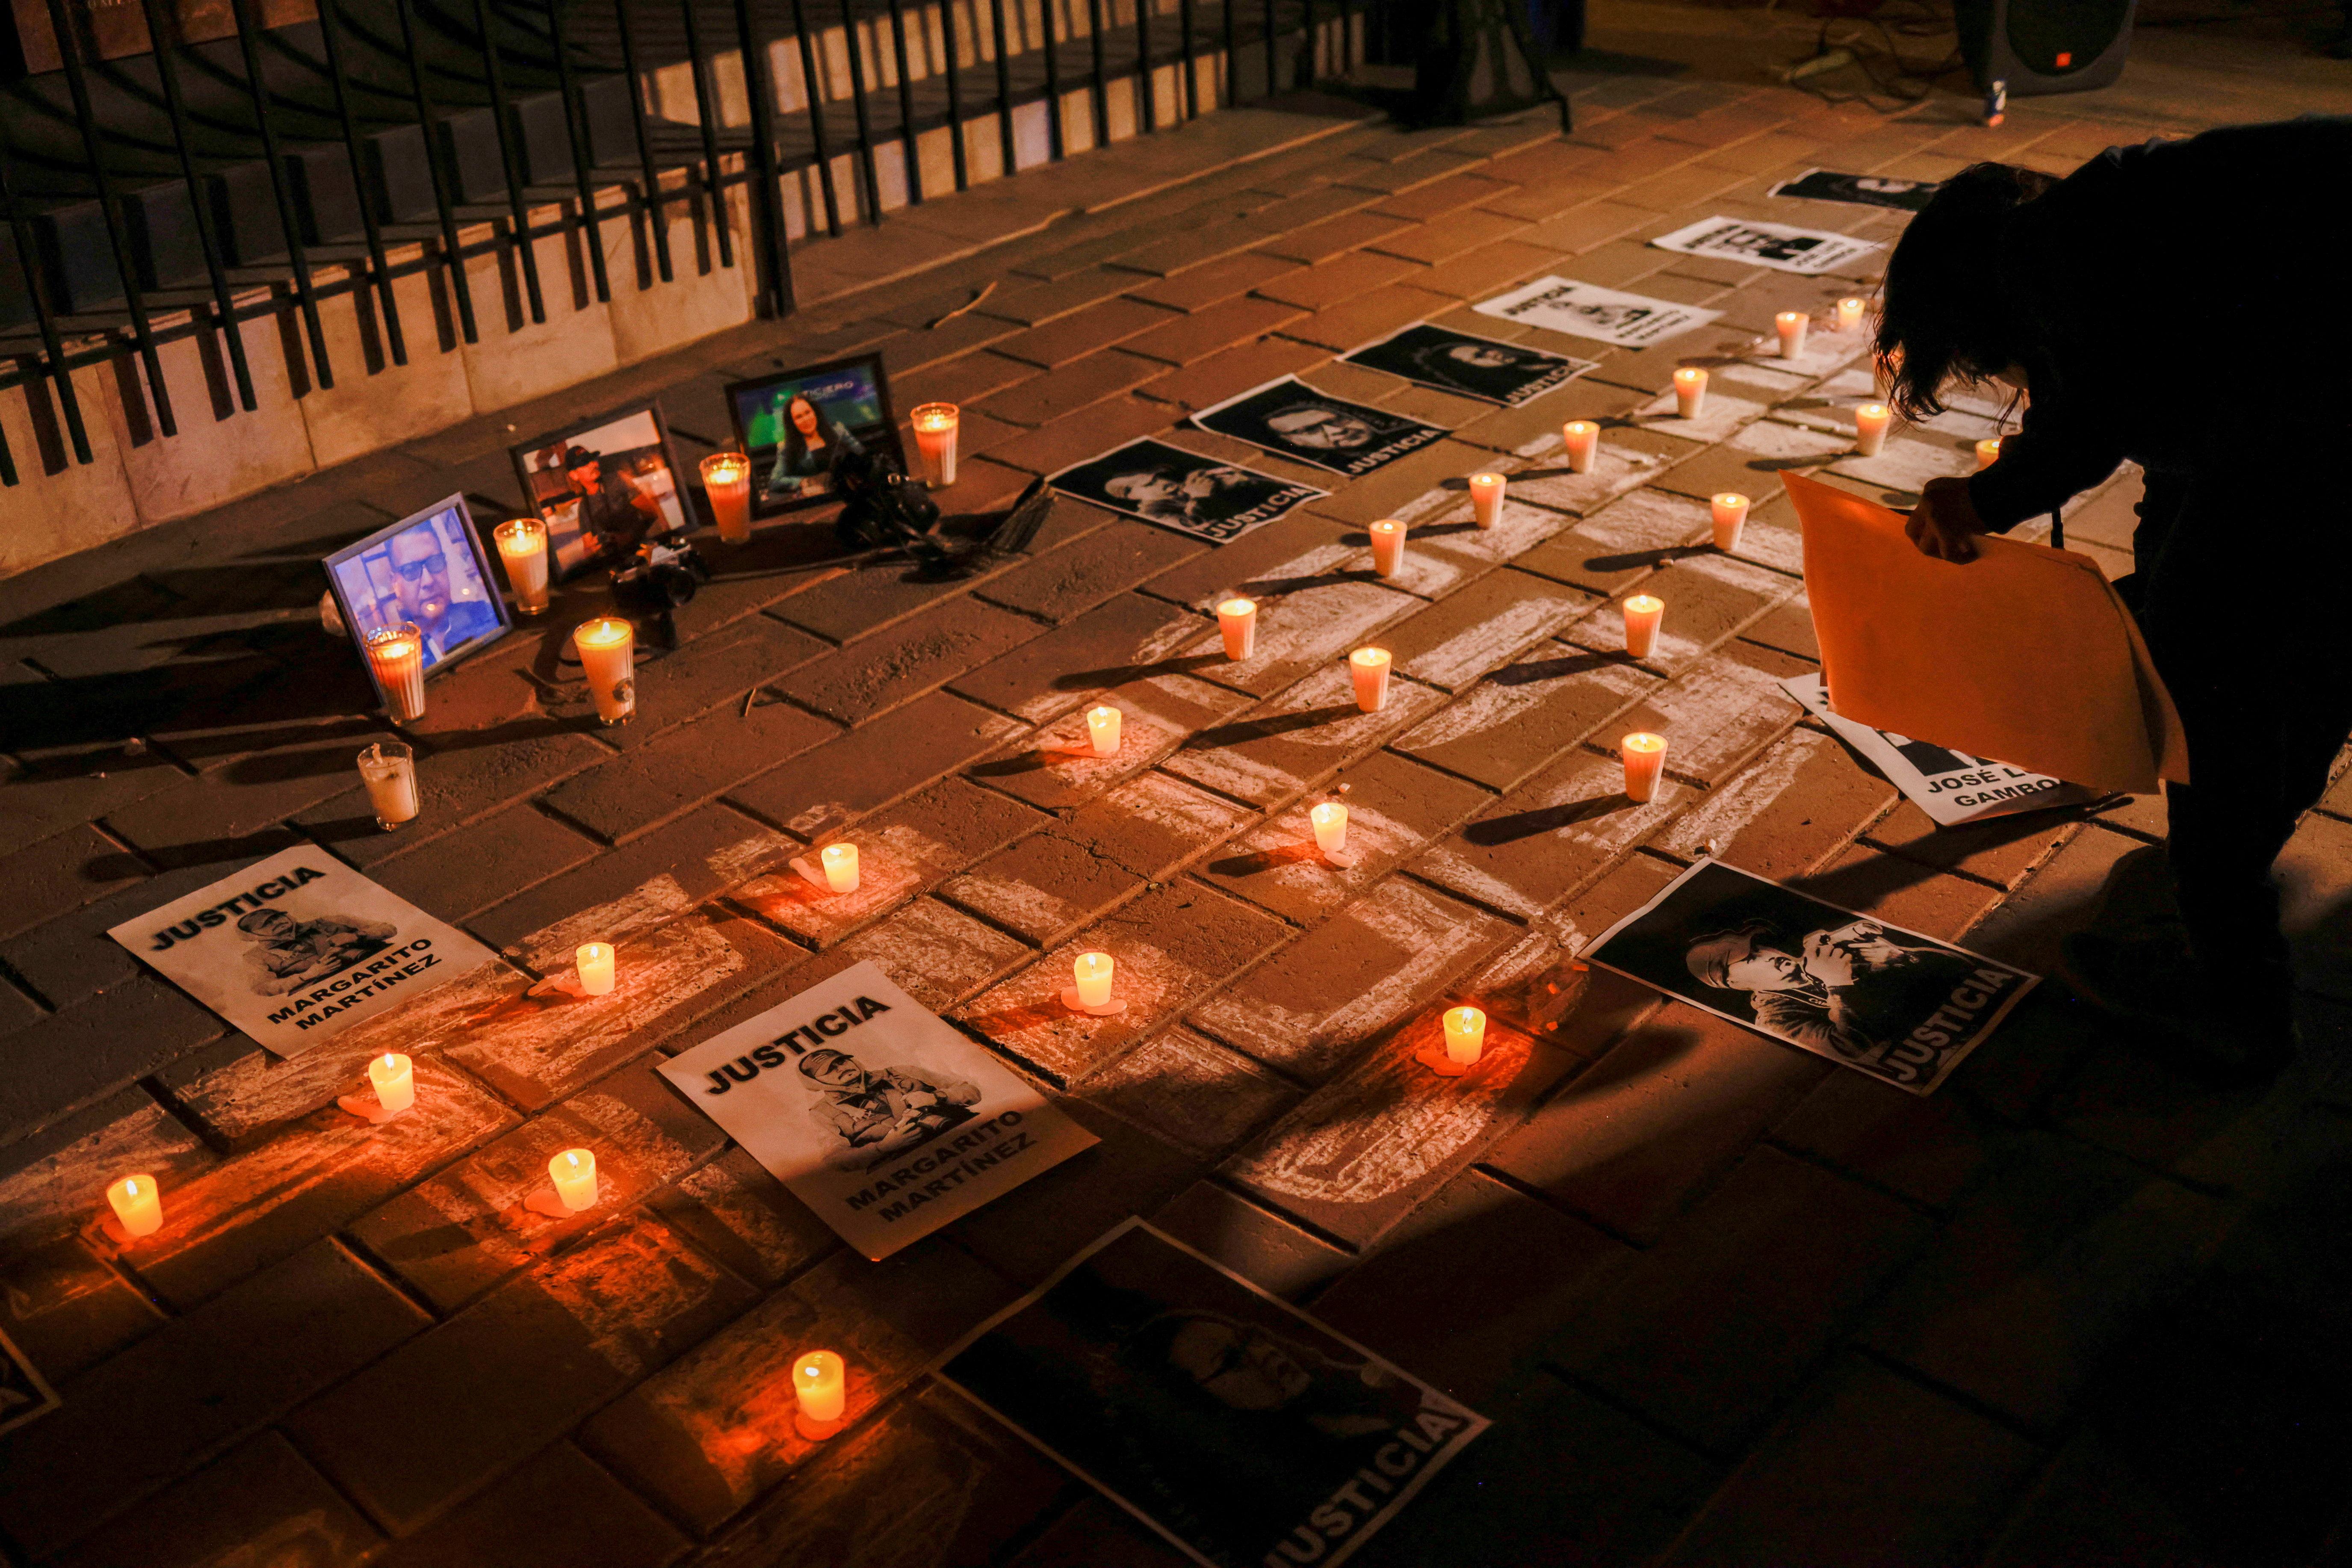 Signs portraying assassinated journalists and reading "Justice" are placed during a vigil held by journalists demanding justice and protection from the federal government following the killings of three colleagues on past days, in the Journalist's Square in Ciudad Juarez, Mexico, January 25, 2022. REUTERS/Jose Luis Gonzalez